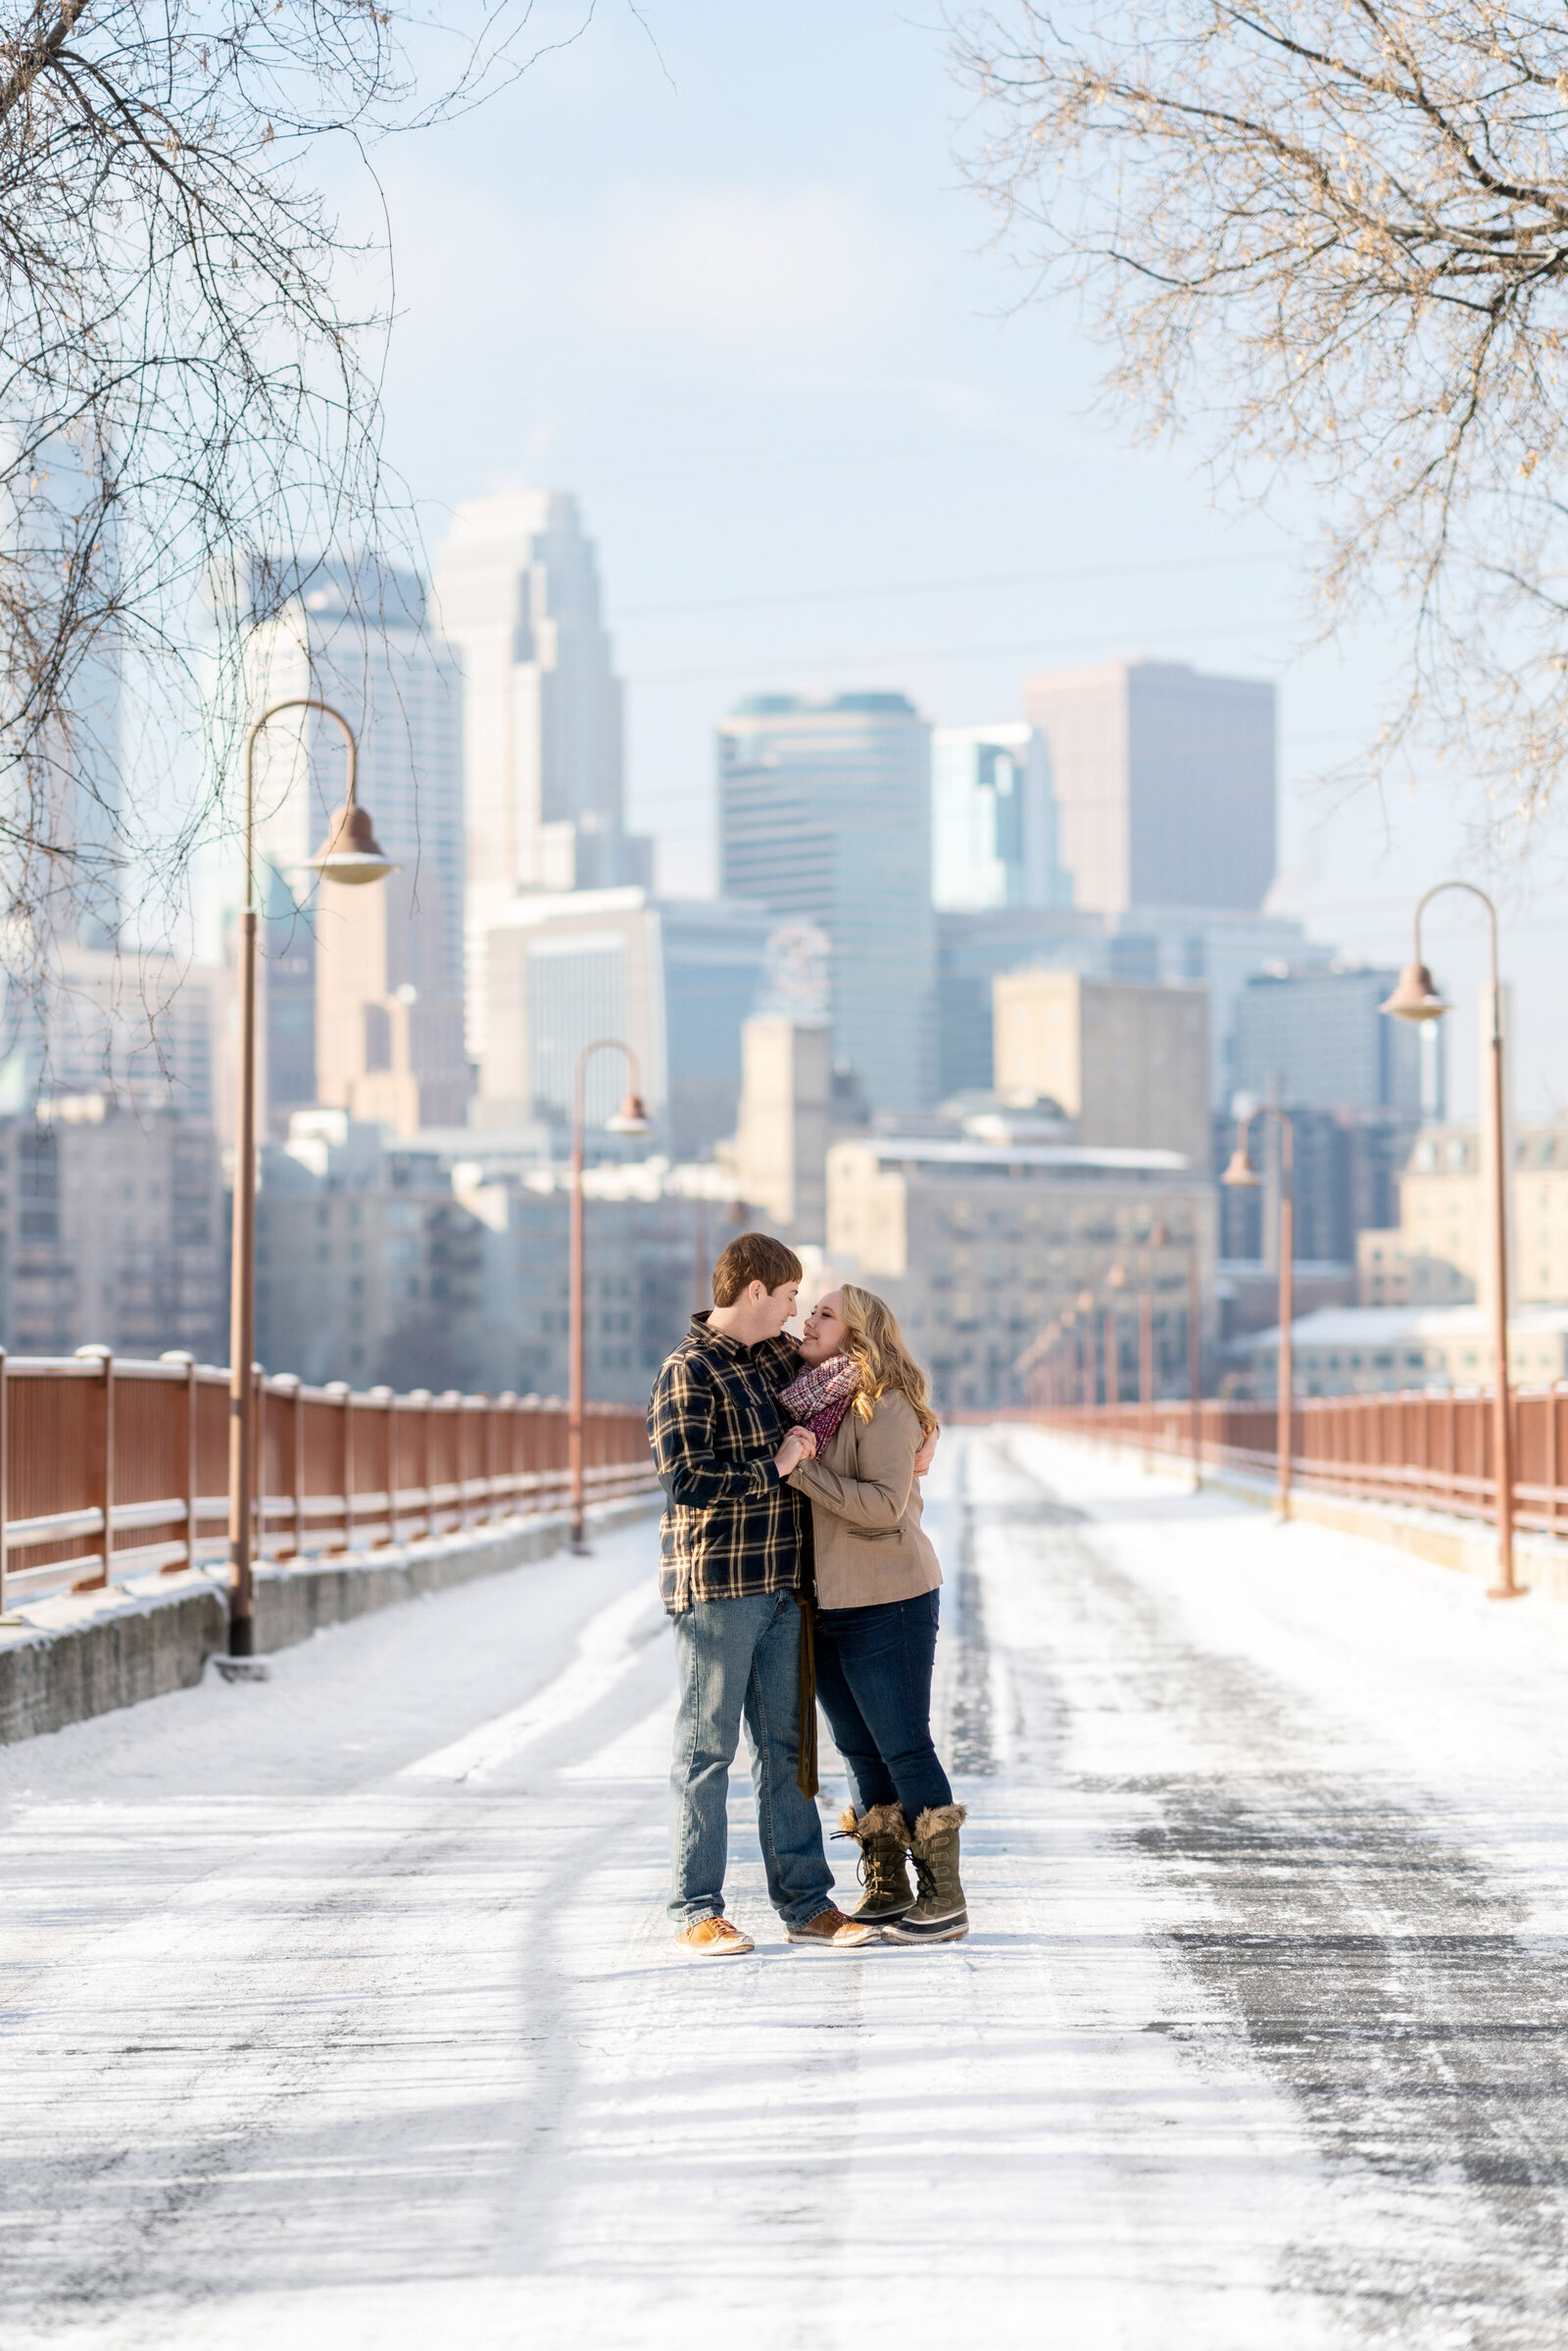 Erin and Mark - Minnesota Winter Engagement Photography - Stone Arch Bridge - RKH Images (155 of 268)